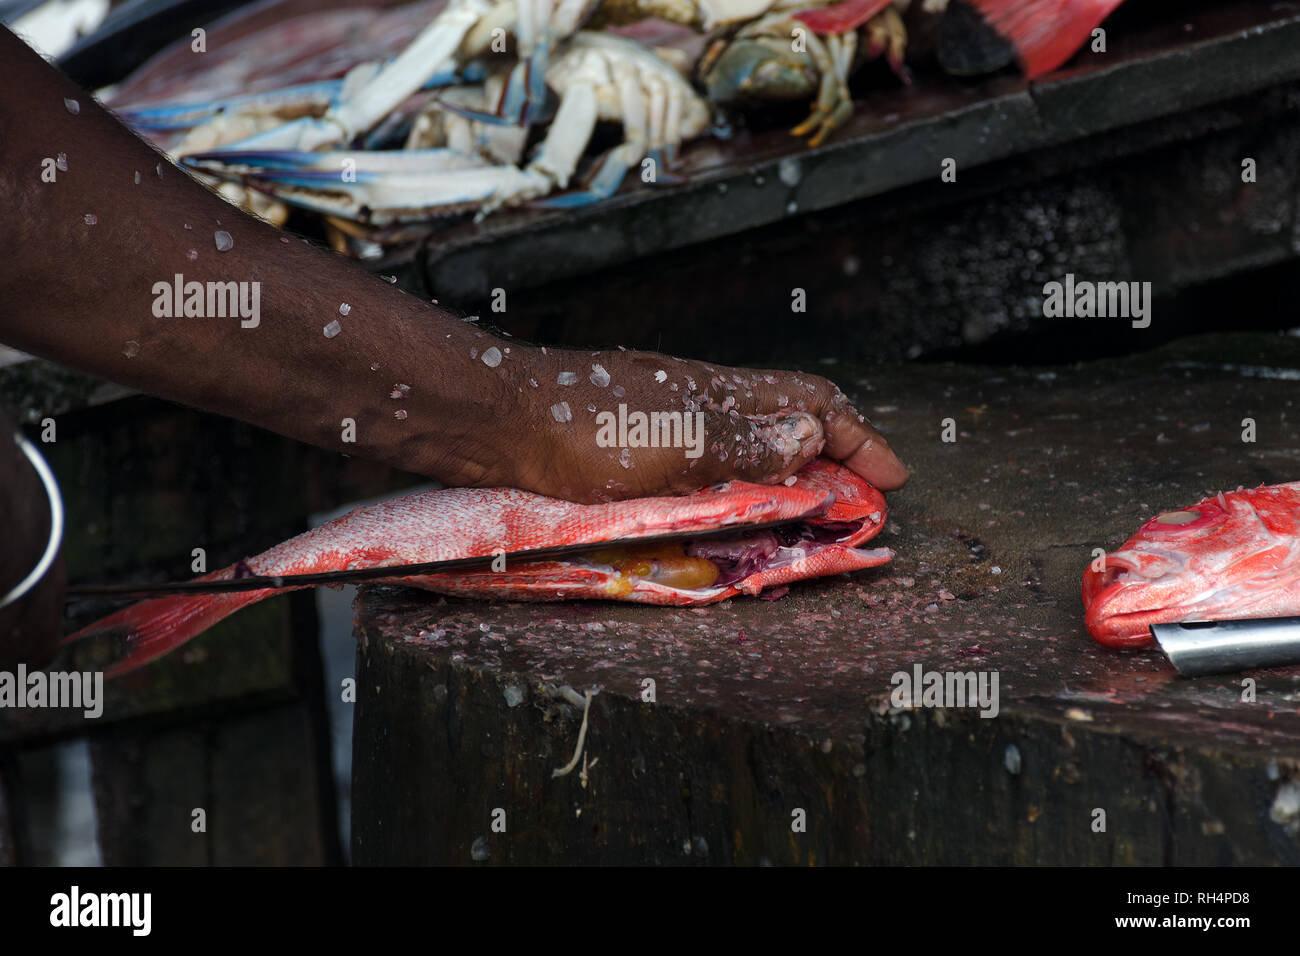 Chief cook cuts a Pargo Fish or Red Snapper on a wooden cutting board. Asian food, Sri Lanka. Stock Photo